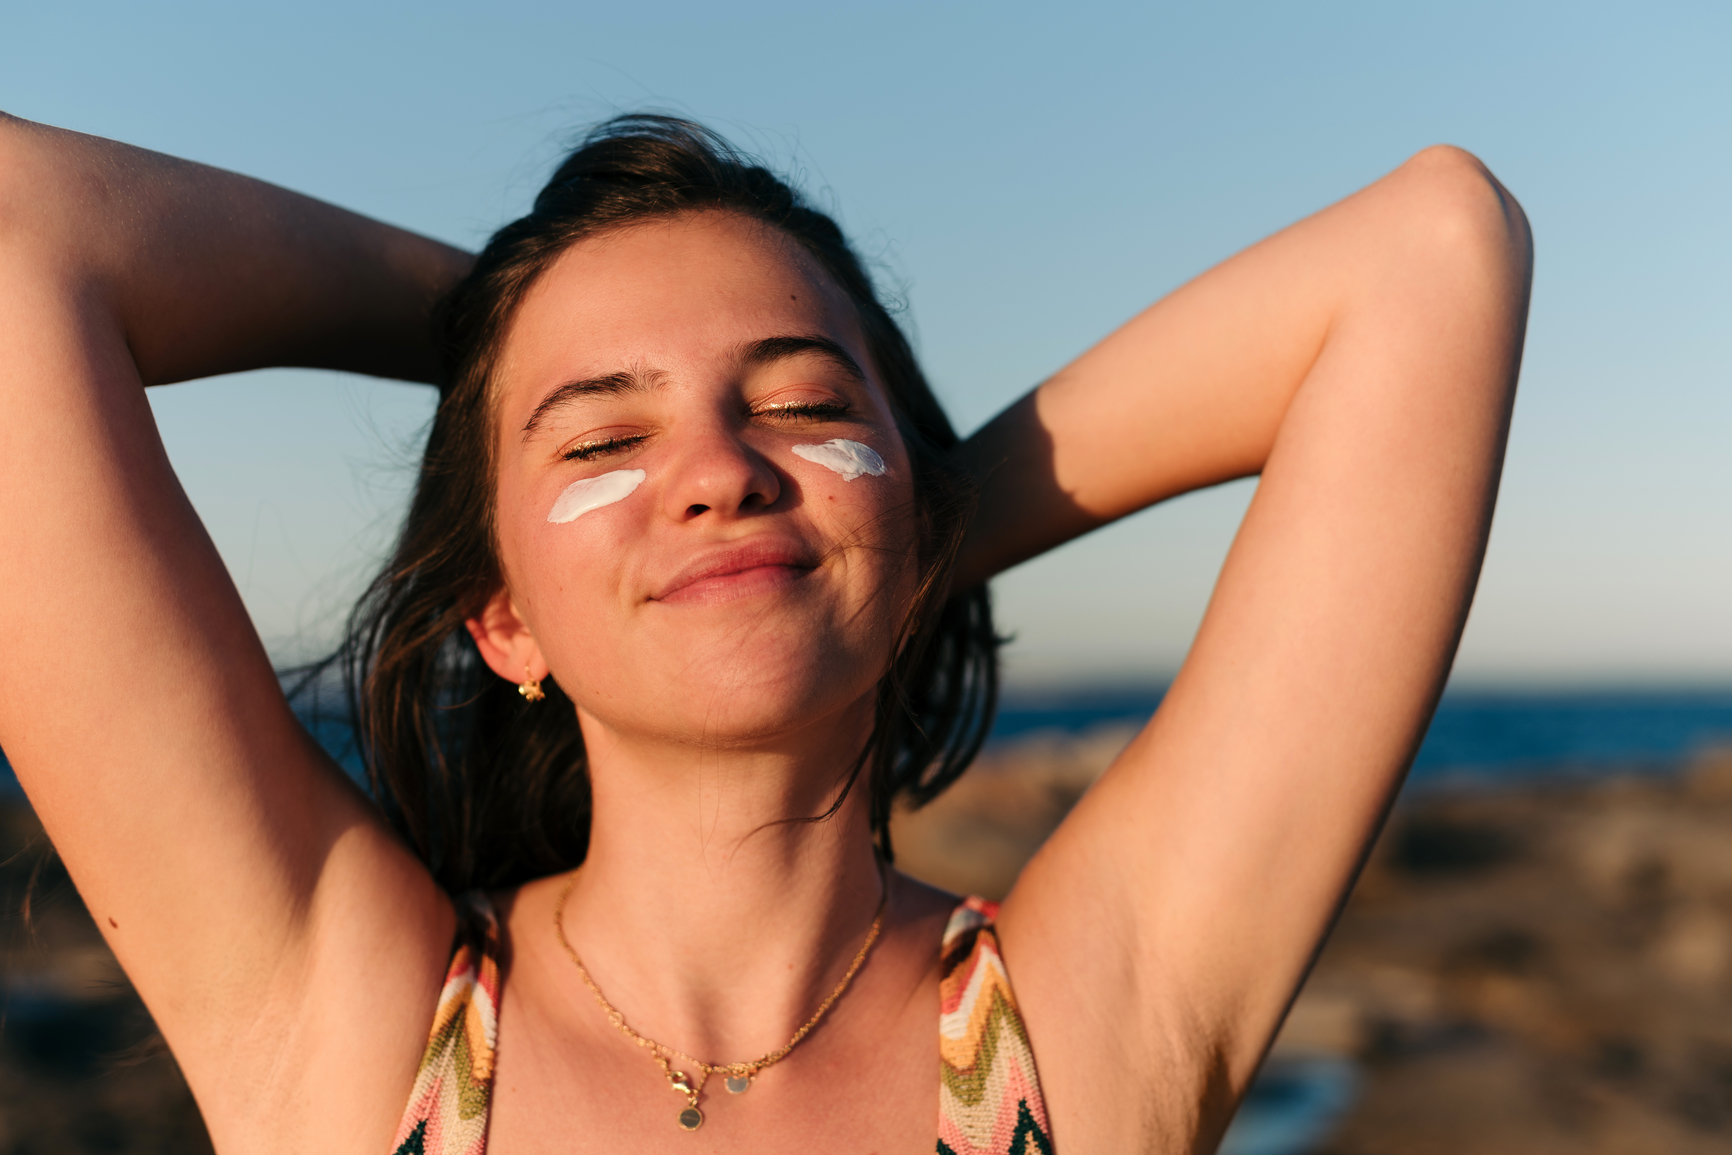 Young woman outdoors with sunscreen on her cheeks, closing her eyes and smiling.